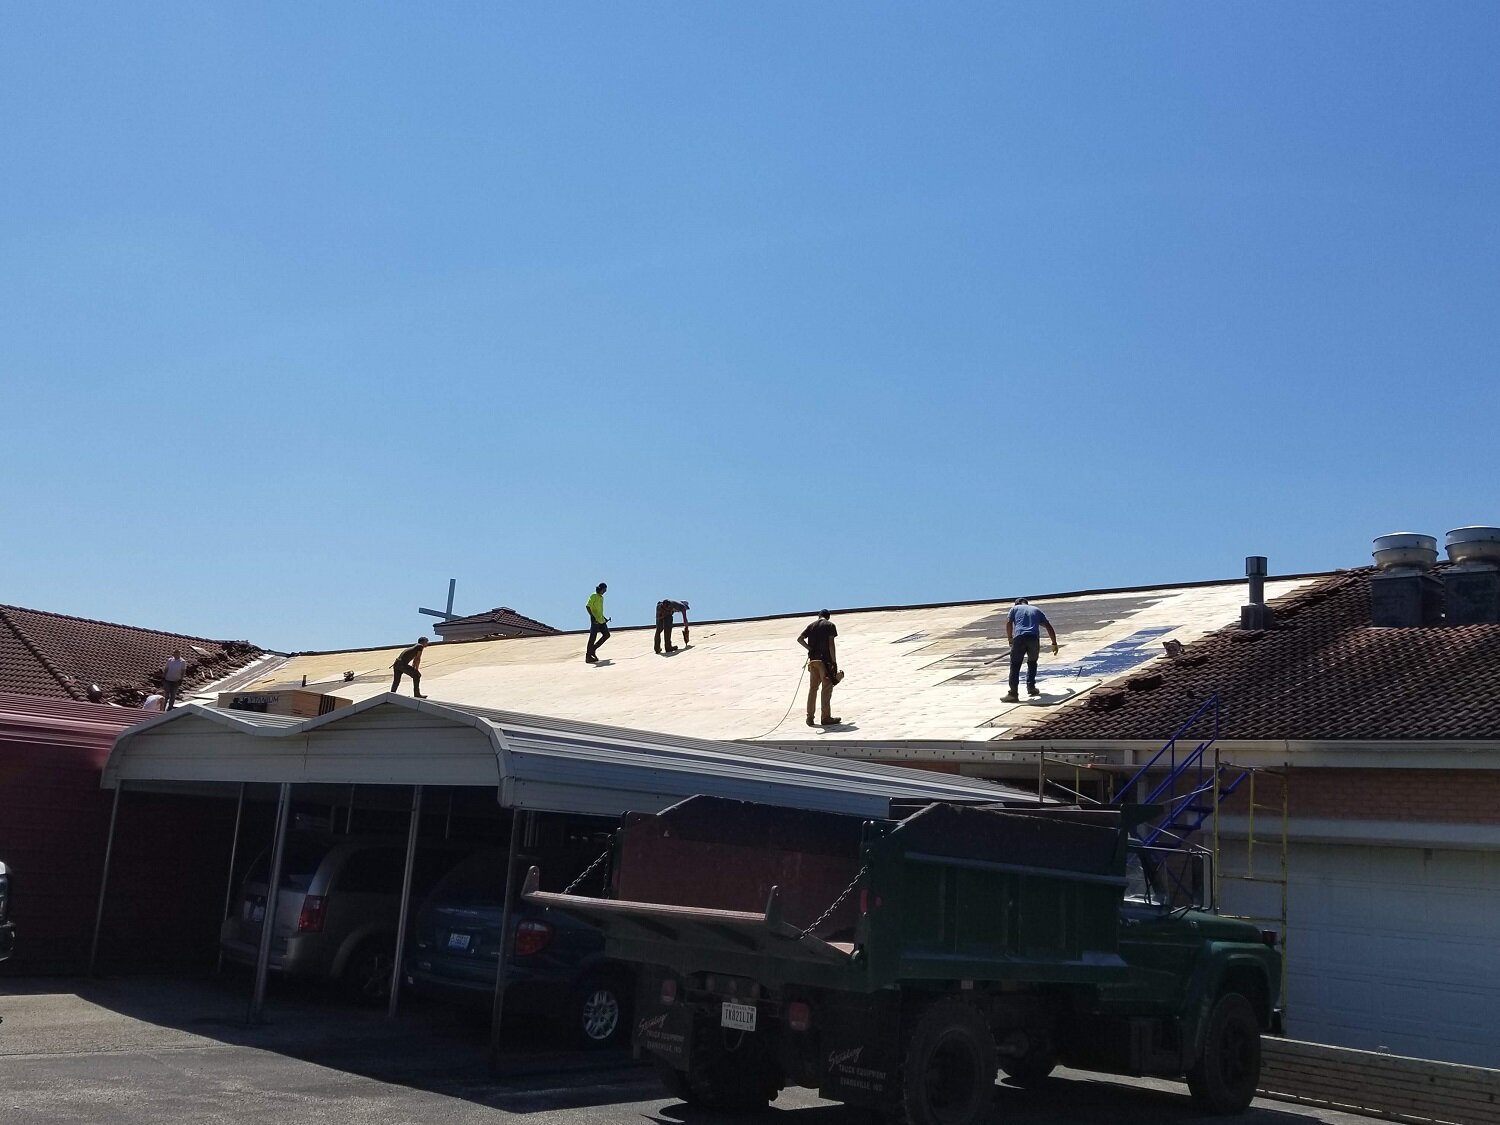 June 9 - work has begun on our work wing roof